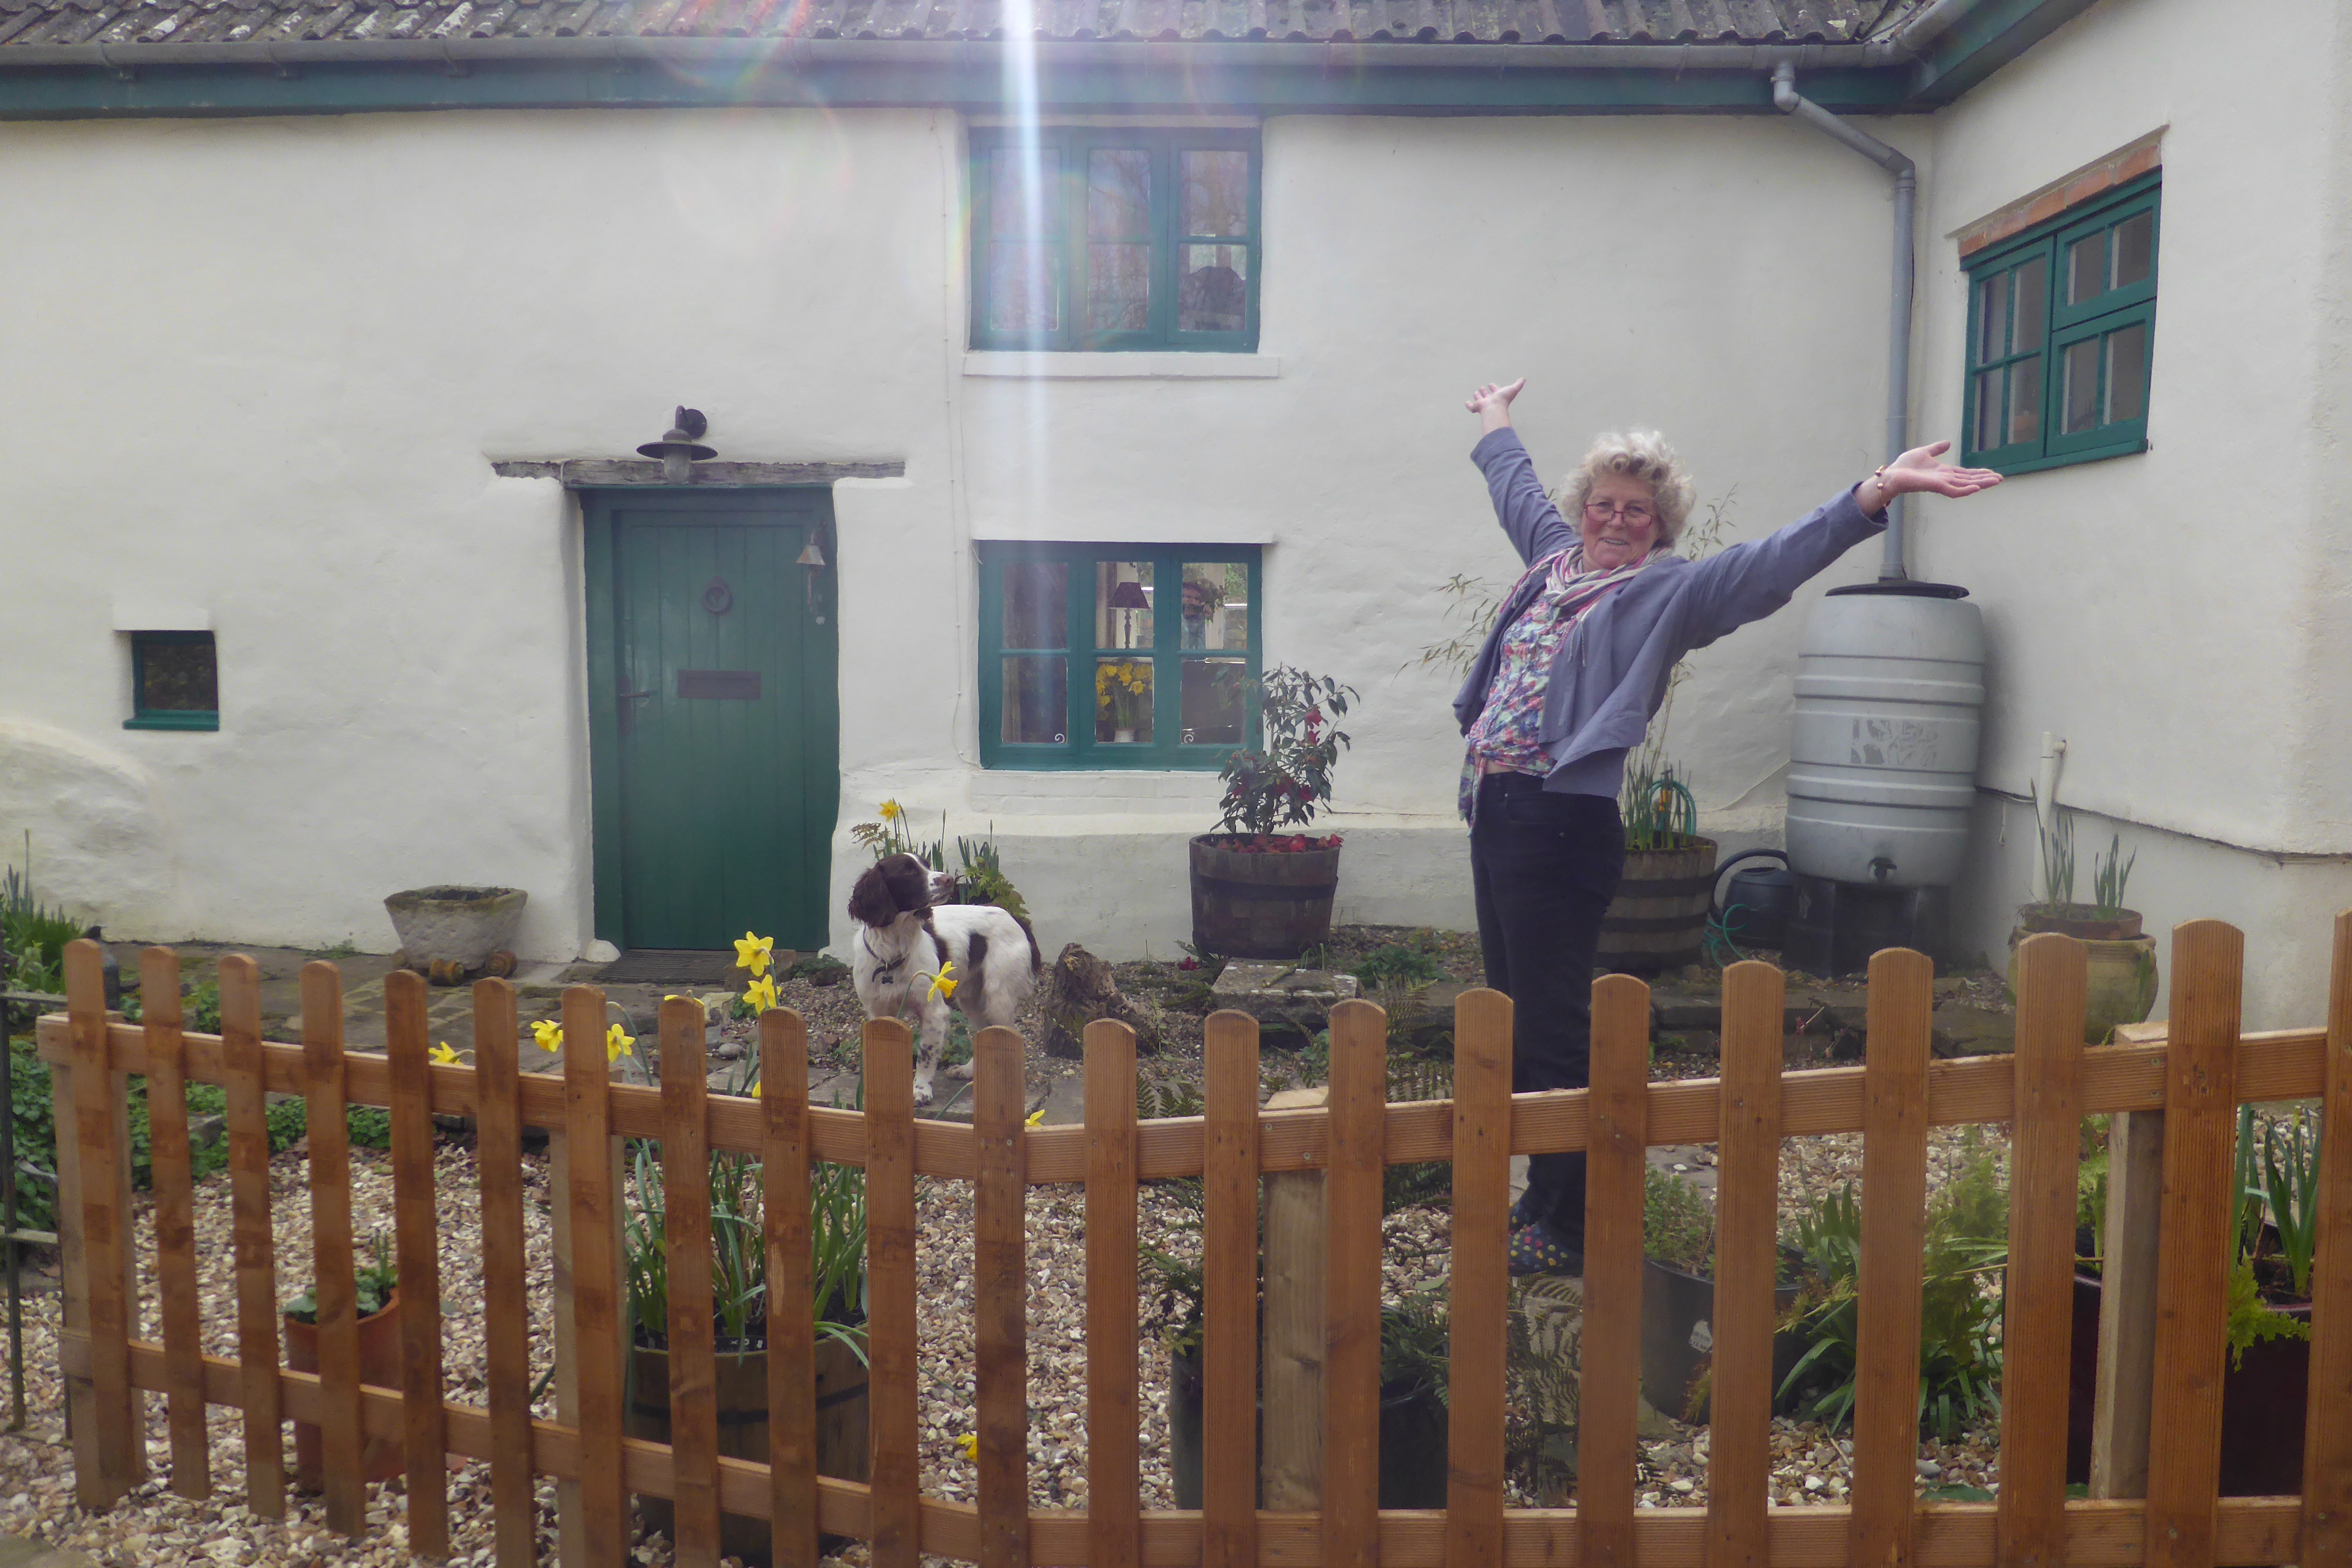 Image-of-a-happy-customer-Nikki-standing-by-the-discreet-high-quality-below-ground-WPL-Diamond-package-wastewater-sewage-treatment-pant-for-off-mains-drainage- at-a-beautiful-cottage-in-the-uk-the-wpl-diamond-replaced-a-leaking-septic-tank.